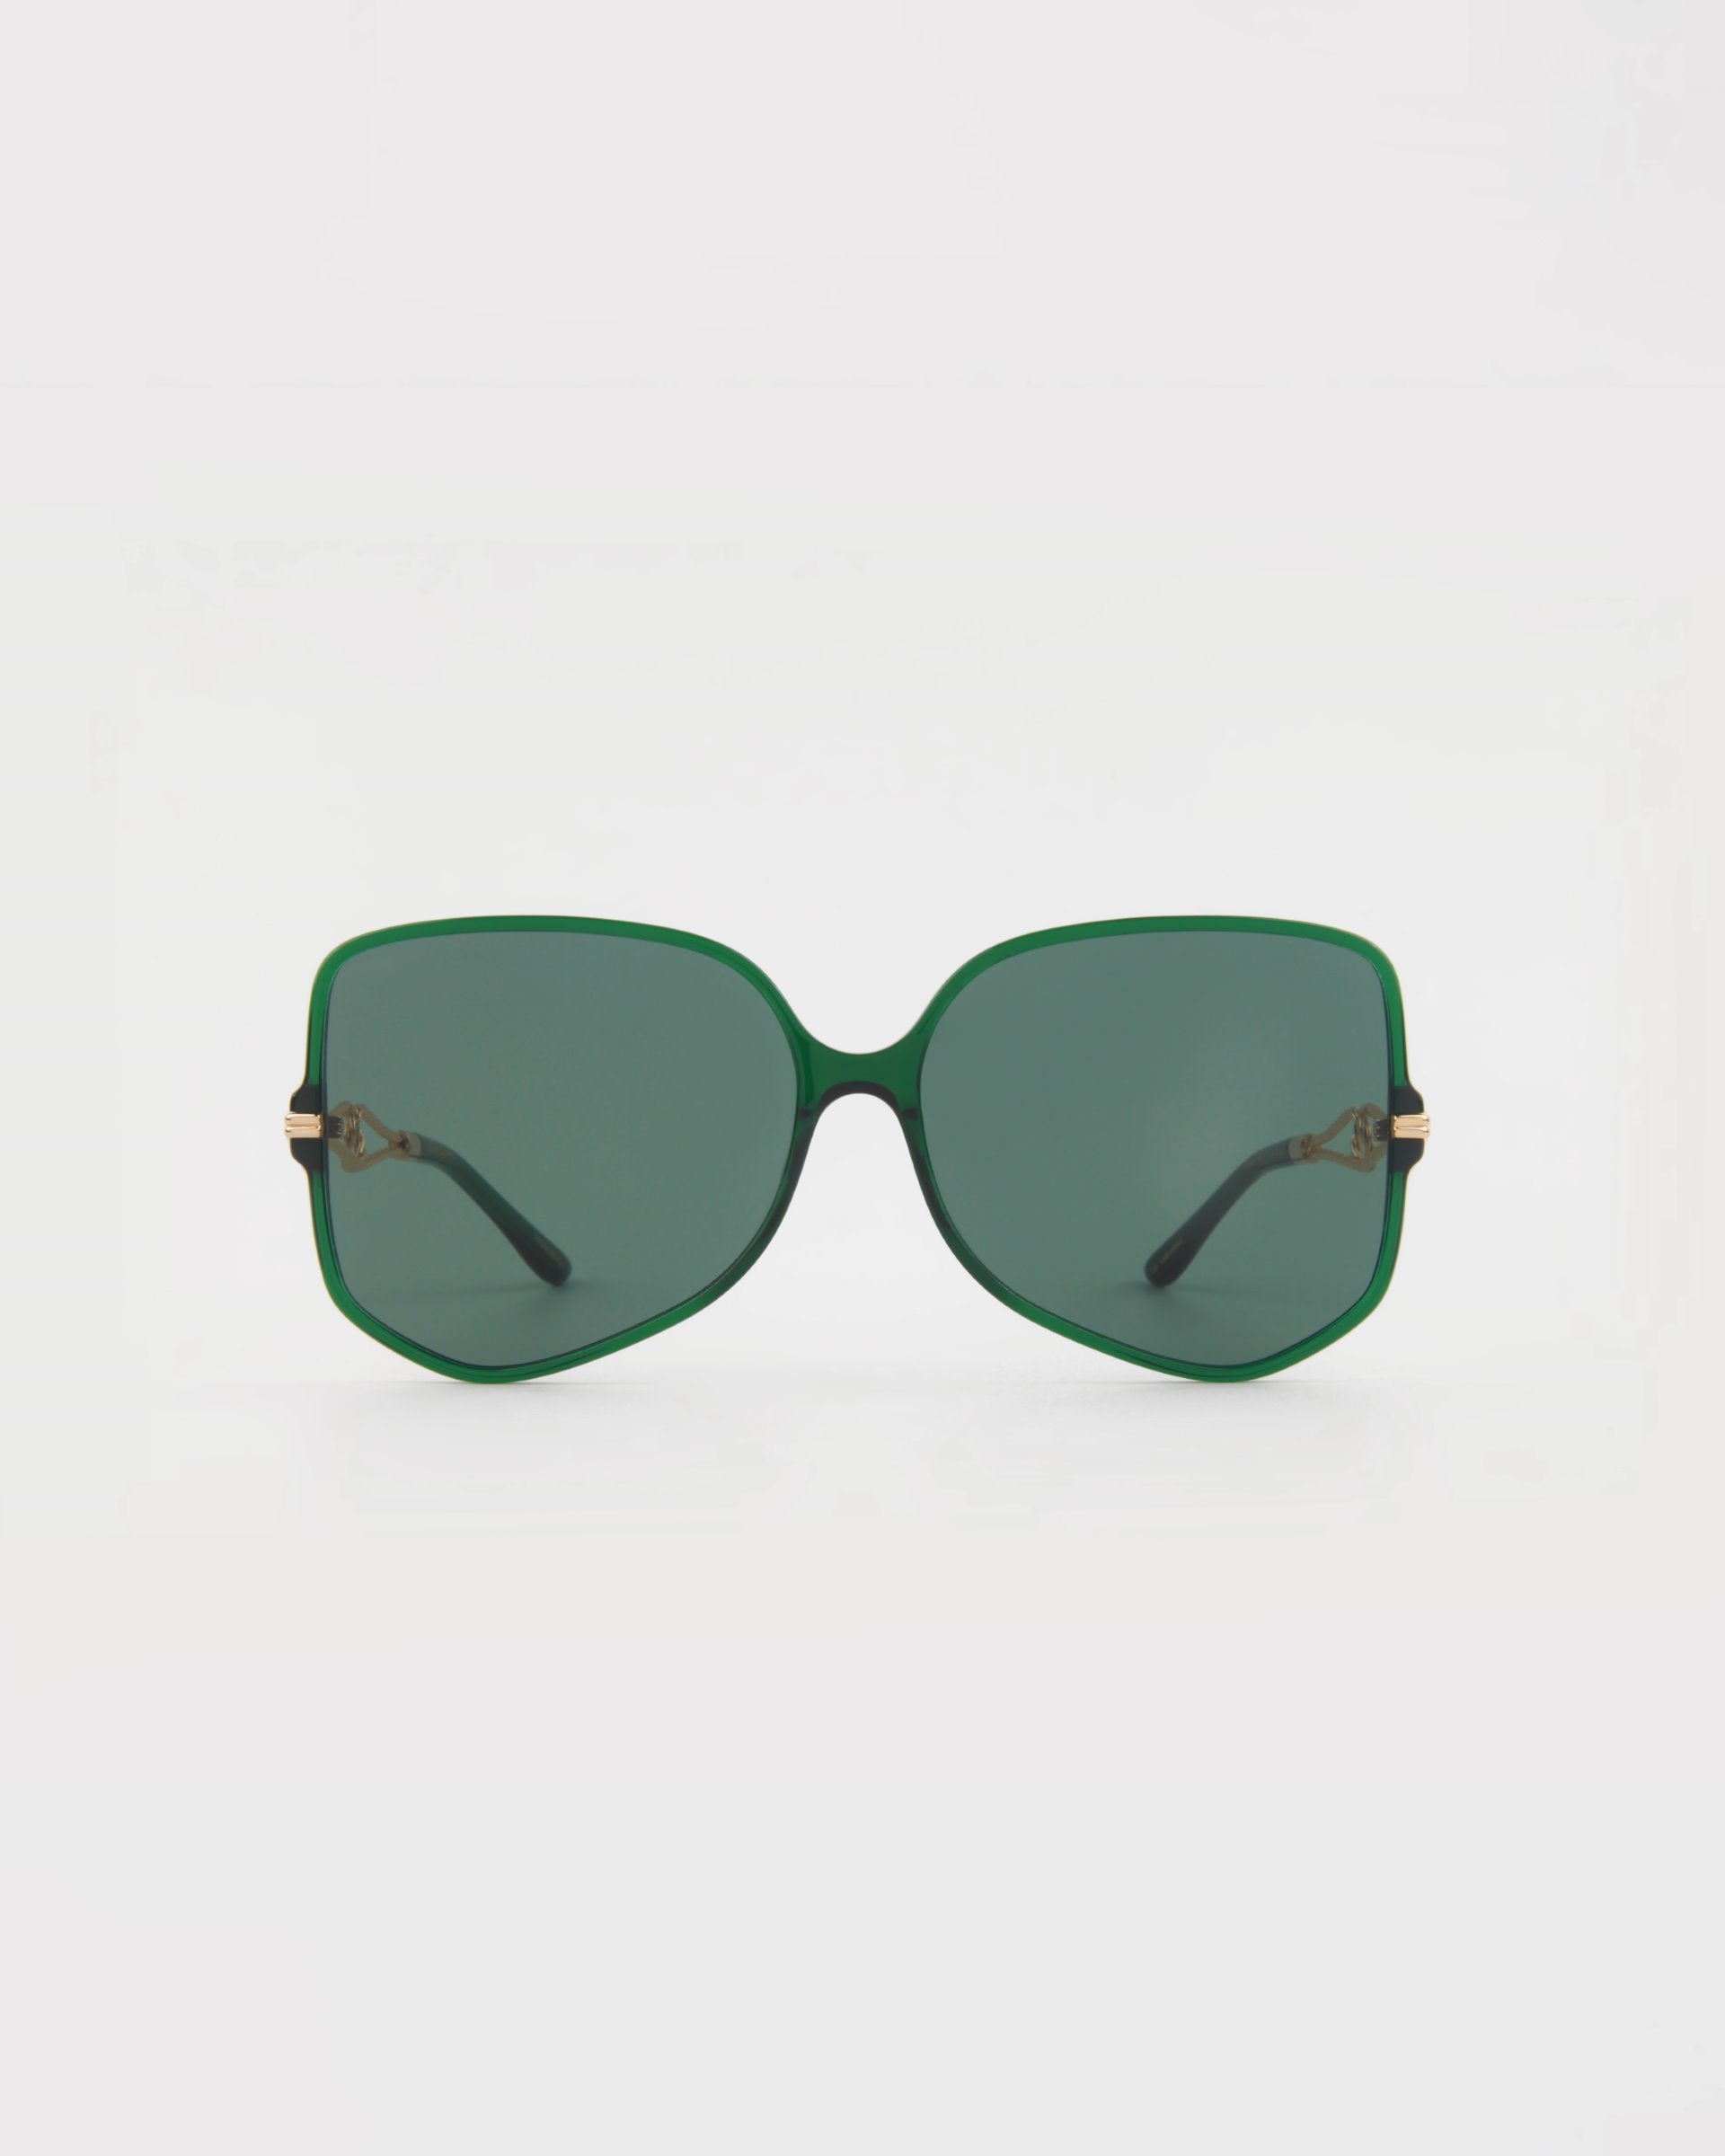 A pair of oversized, square-shaped sunglasses with dark green lenses and handmade acetate green frames is centered on a plain white background. The Voyager sunglasses by For Art's Sake® have black arms, gold accents on the hinges, and offer UVA & UVB protection.